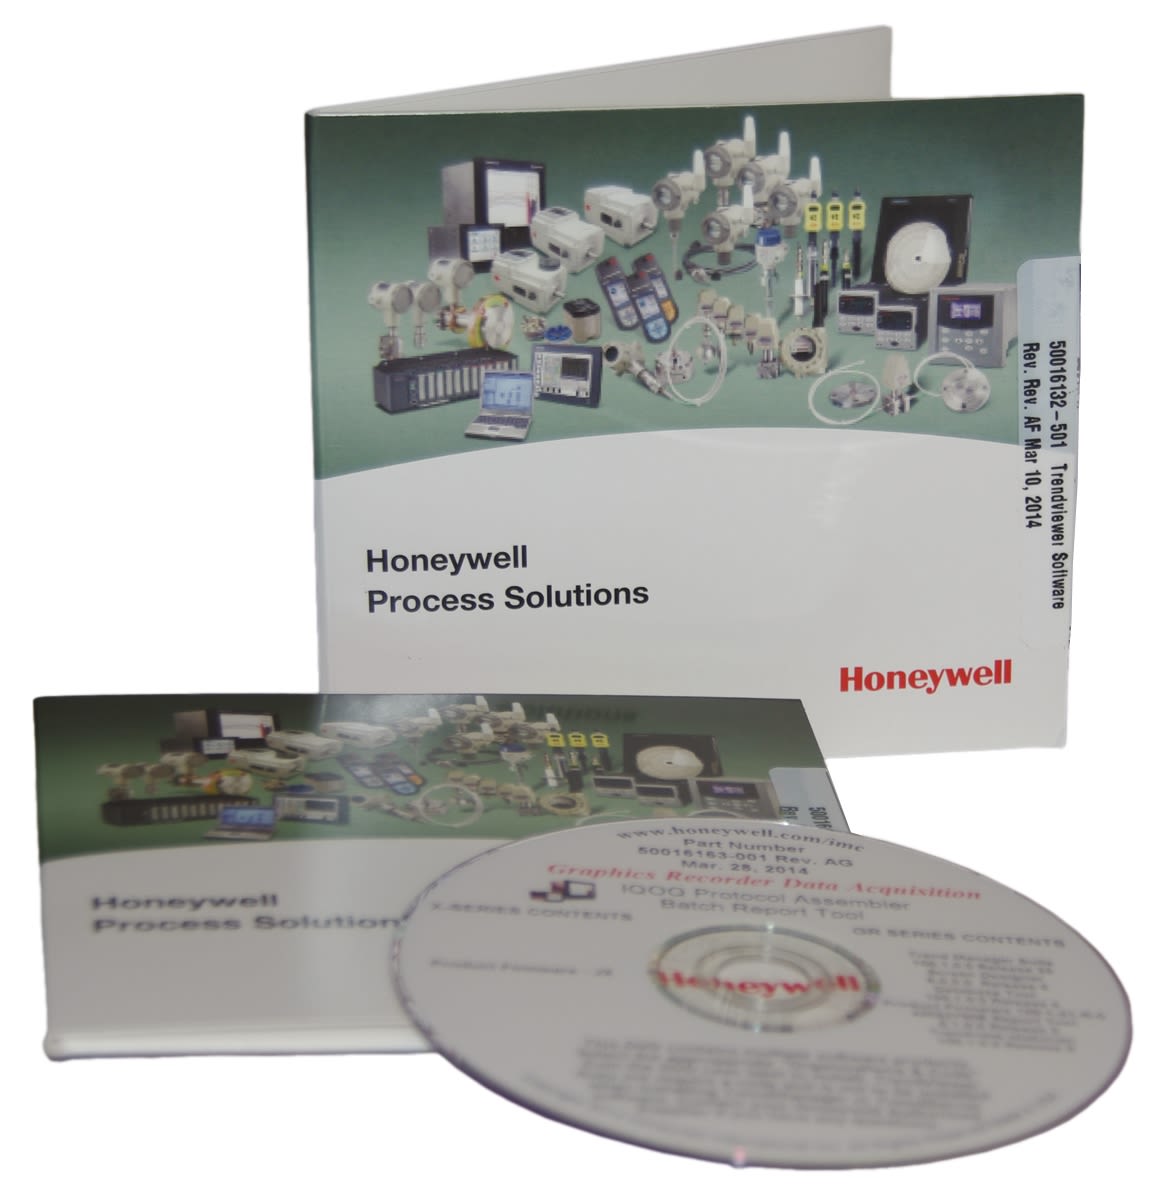 50016134-501 Software for use with Honeywell Digital Process Recorder